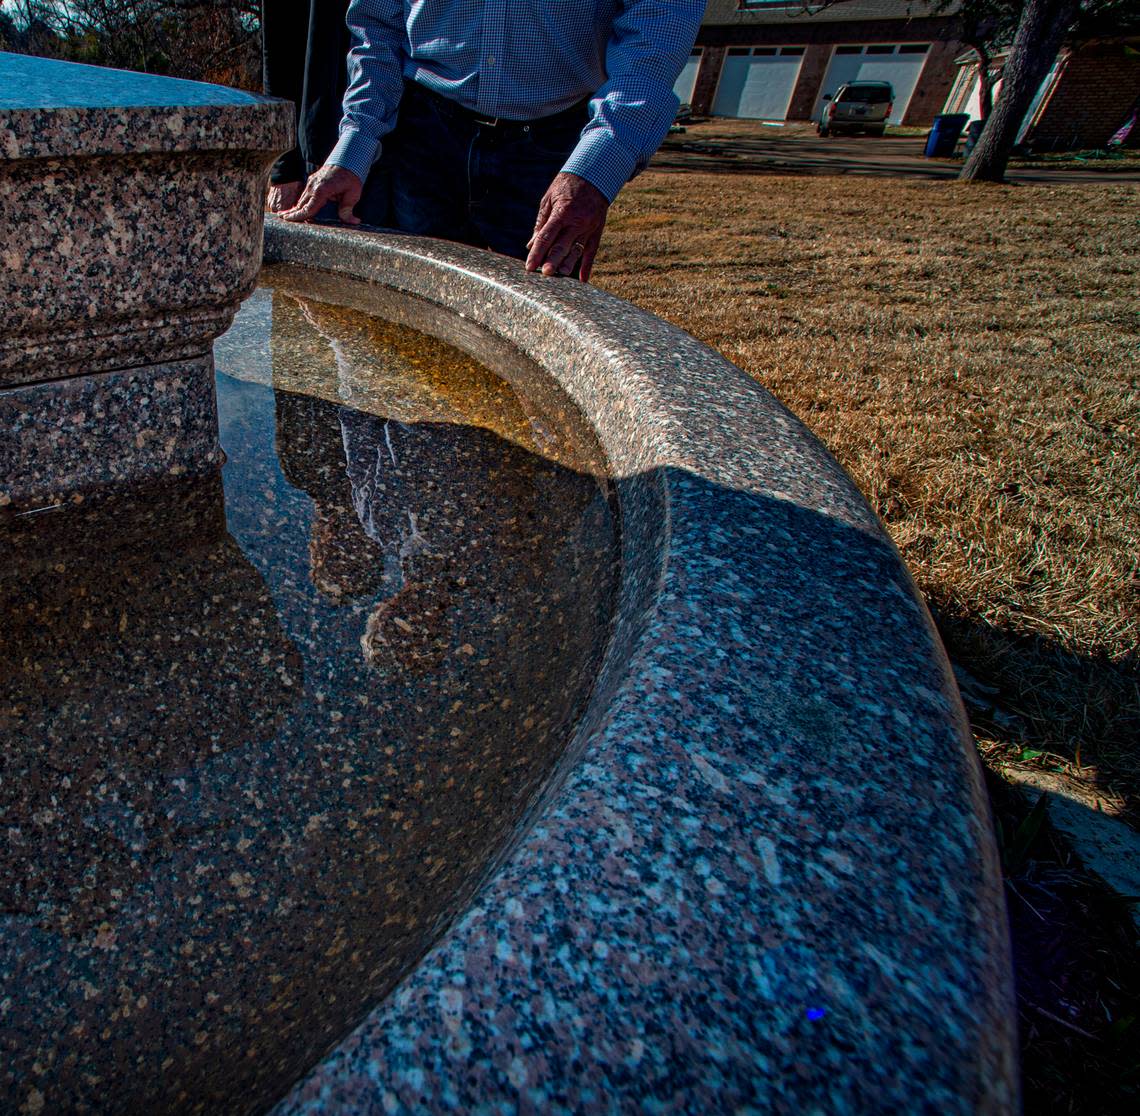 David Hunn replumbed the granite bowl that now sits on their front yard.